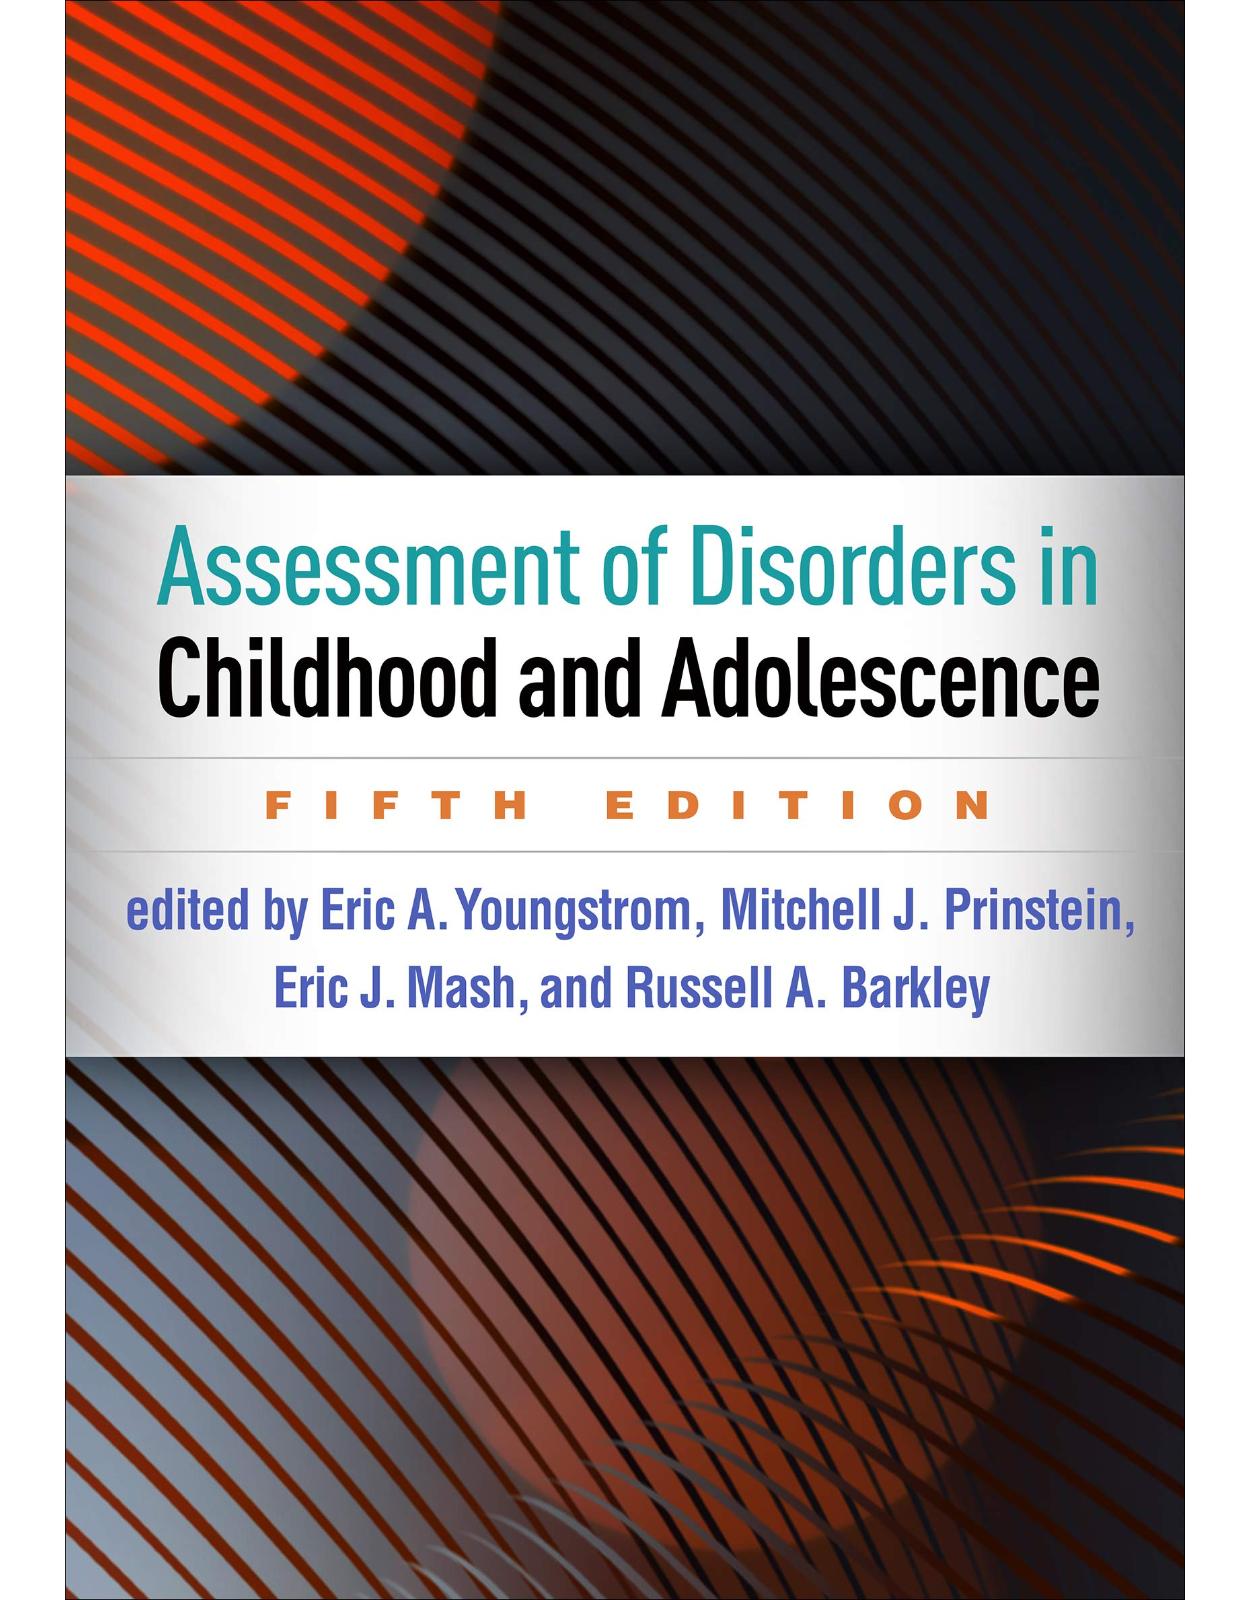 Assessment of Disorders in Childhood and Adolescence